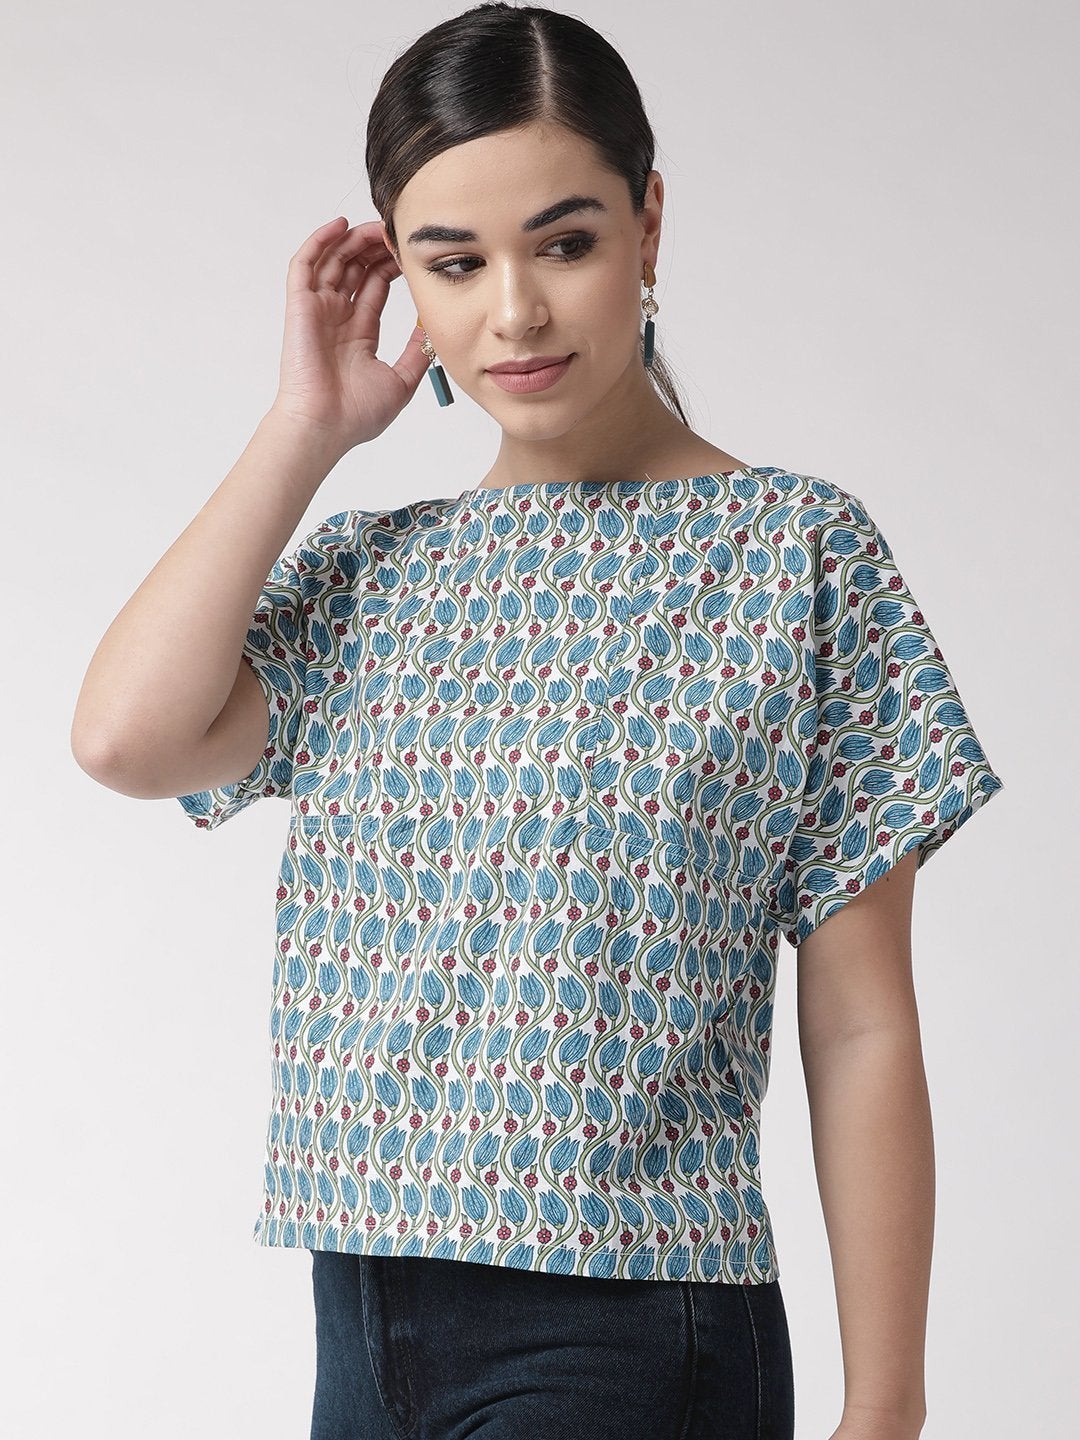 Women's Blue Floral Top - InWeave